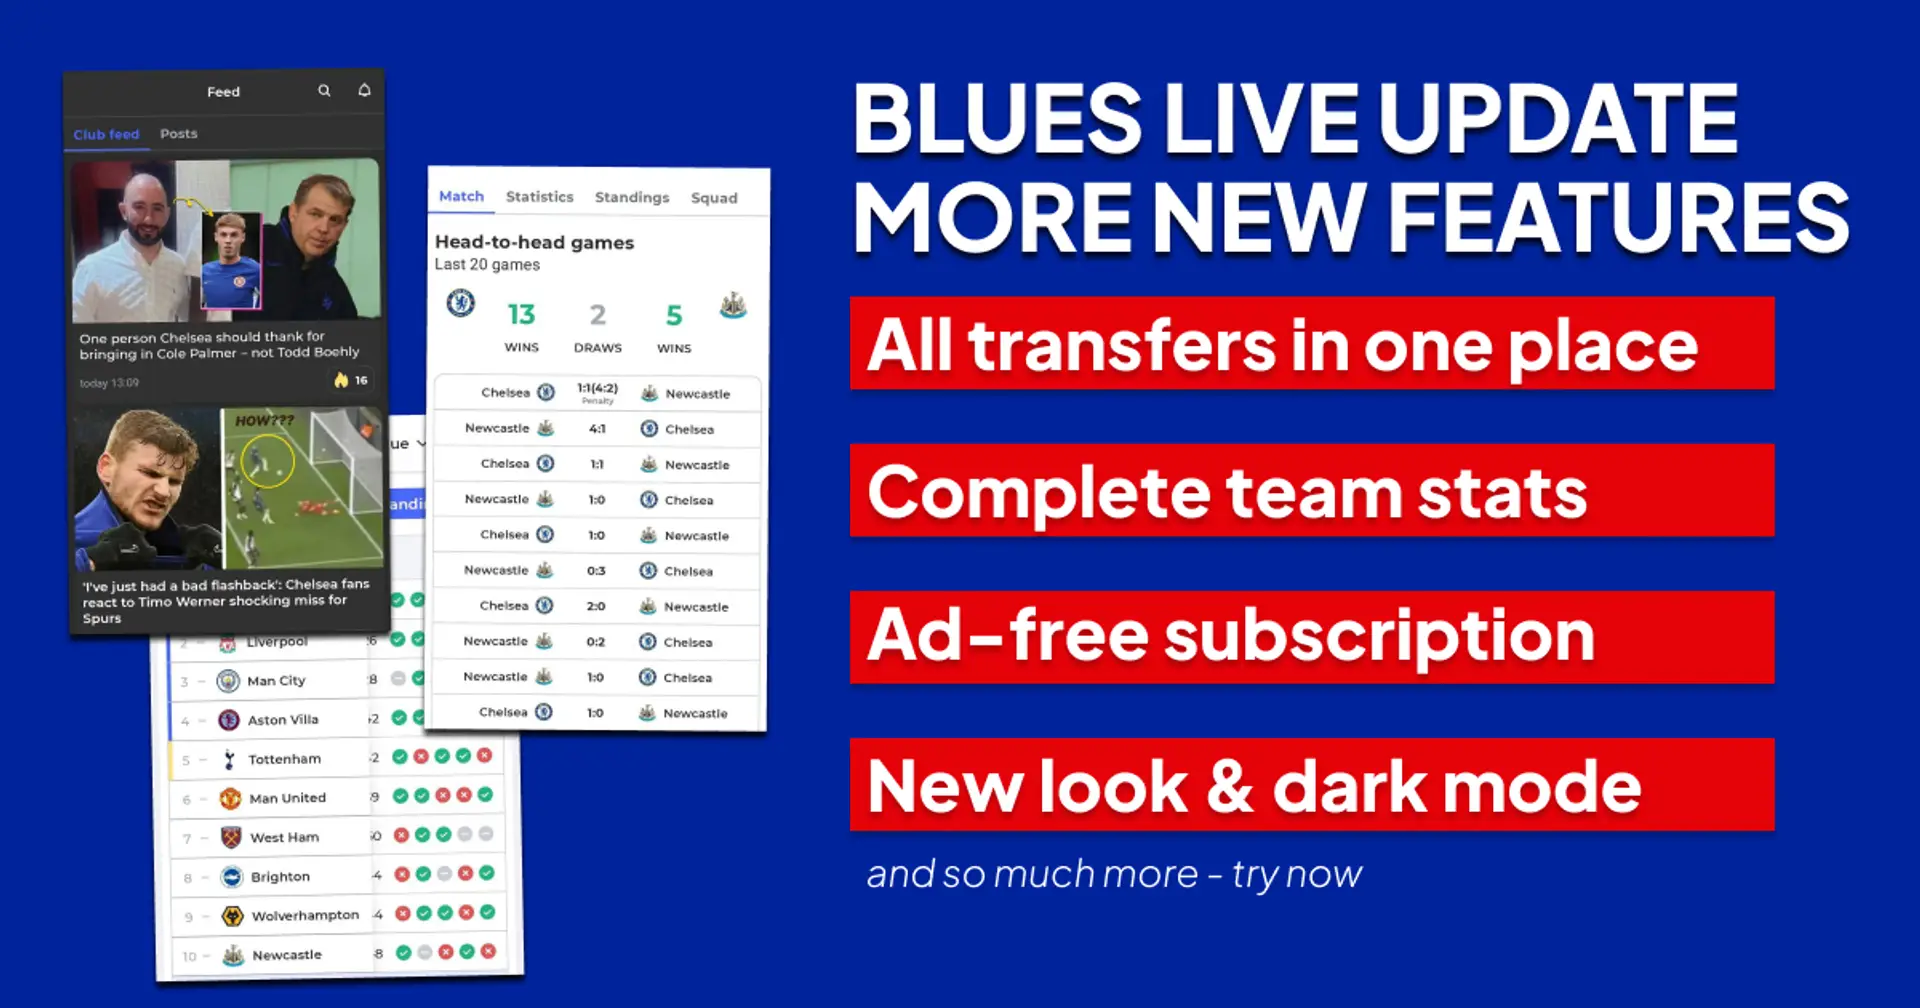 💙 Premium ad-free subscription, all football scores, transfer content & more new features in app UPDATE